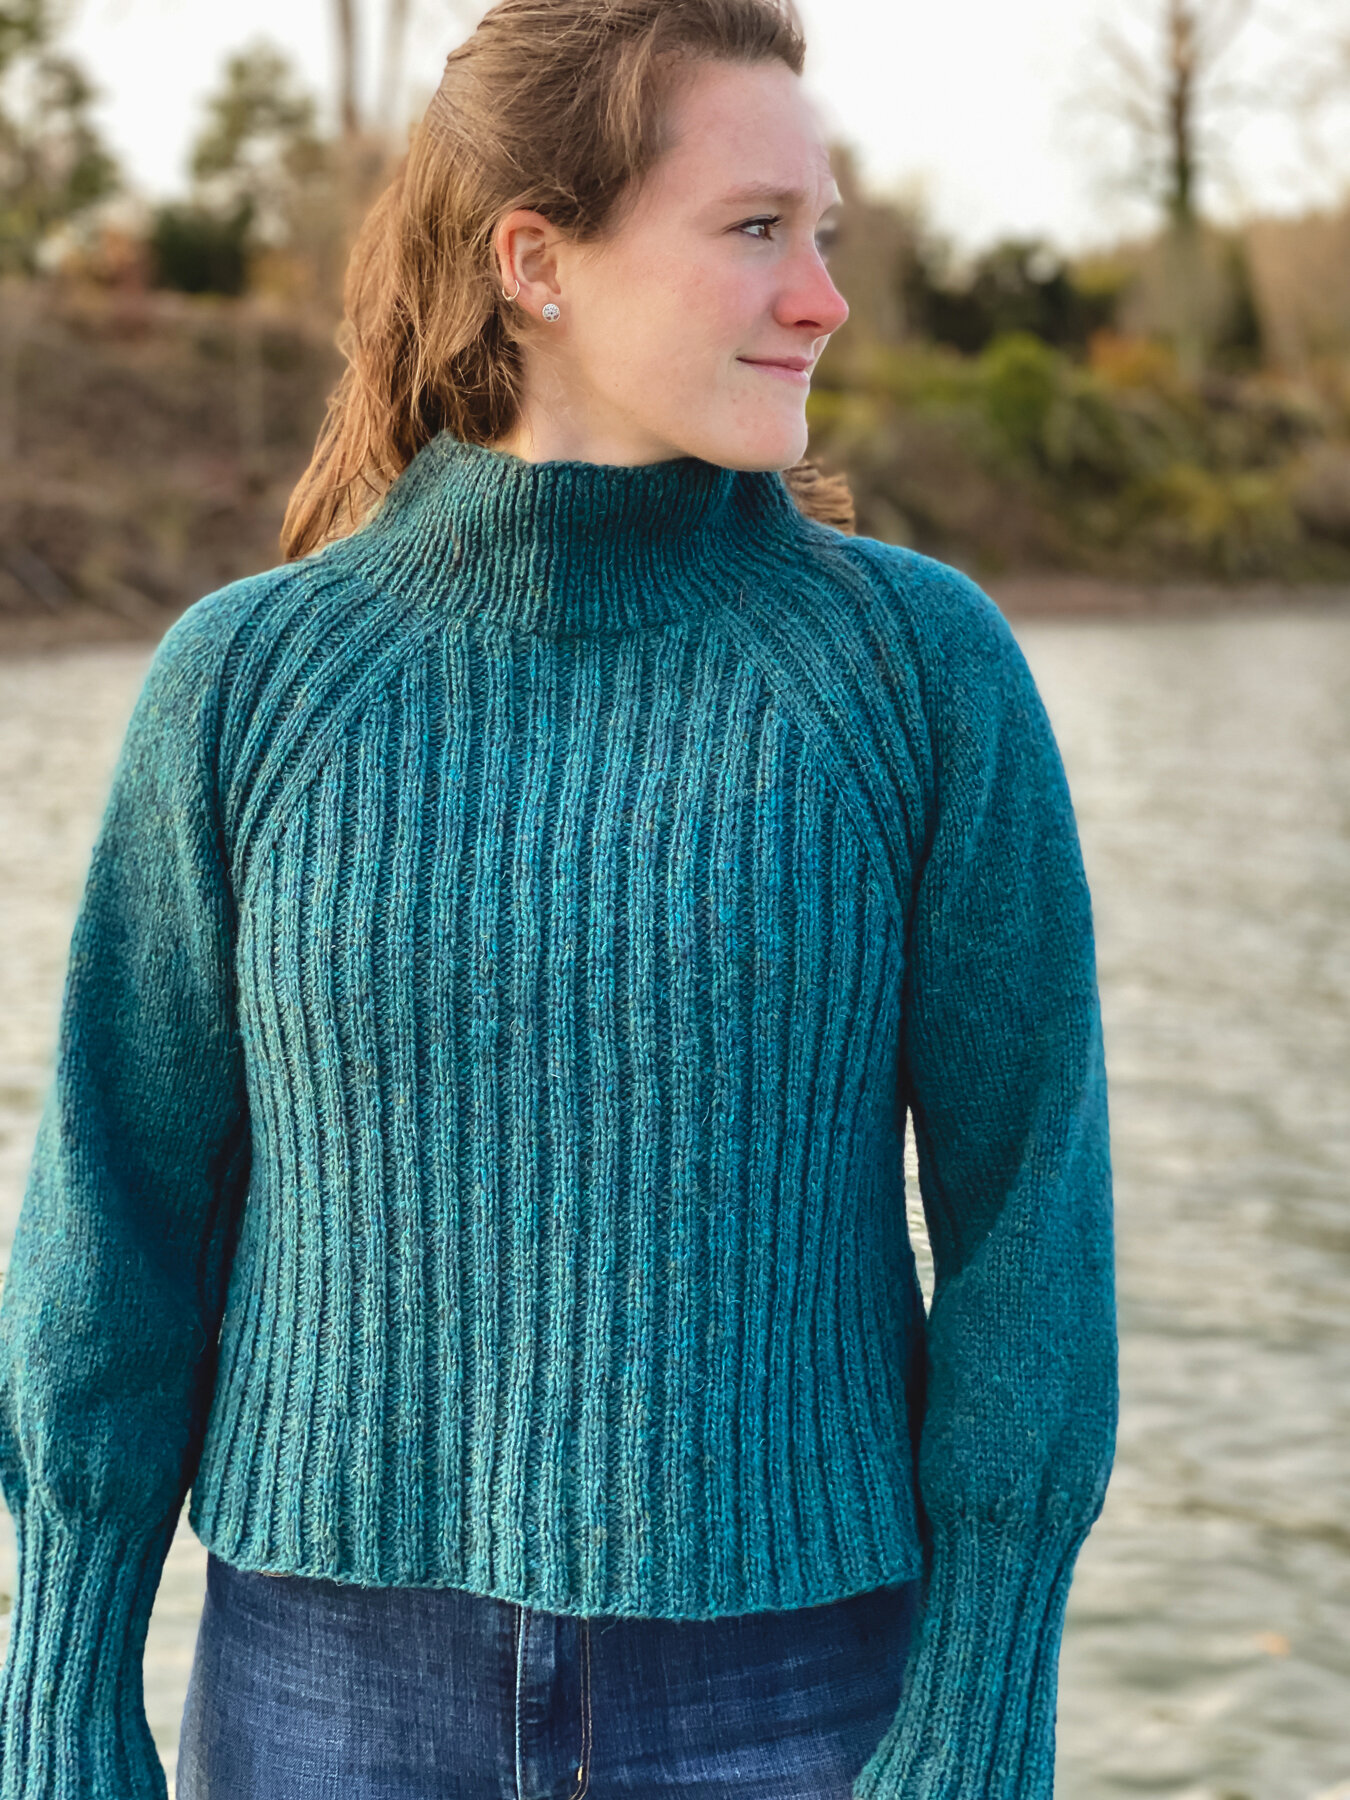 Santiam Canyon Pullover Sweater Knitting Pattern — Knit for the Soul by Kay  Hopkins